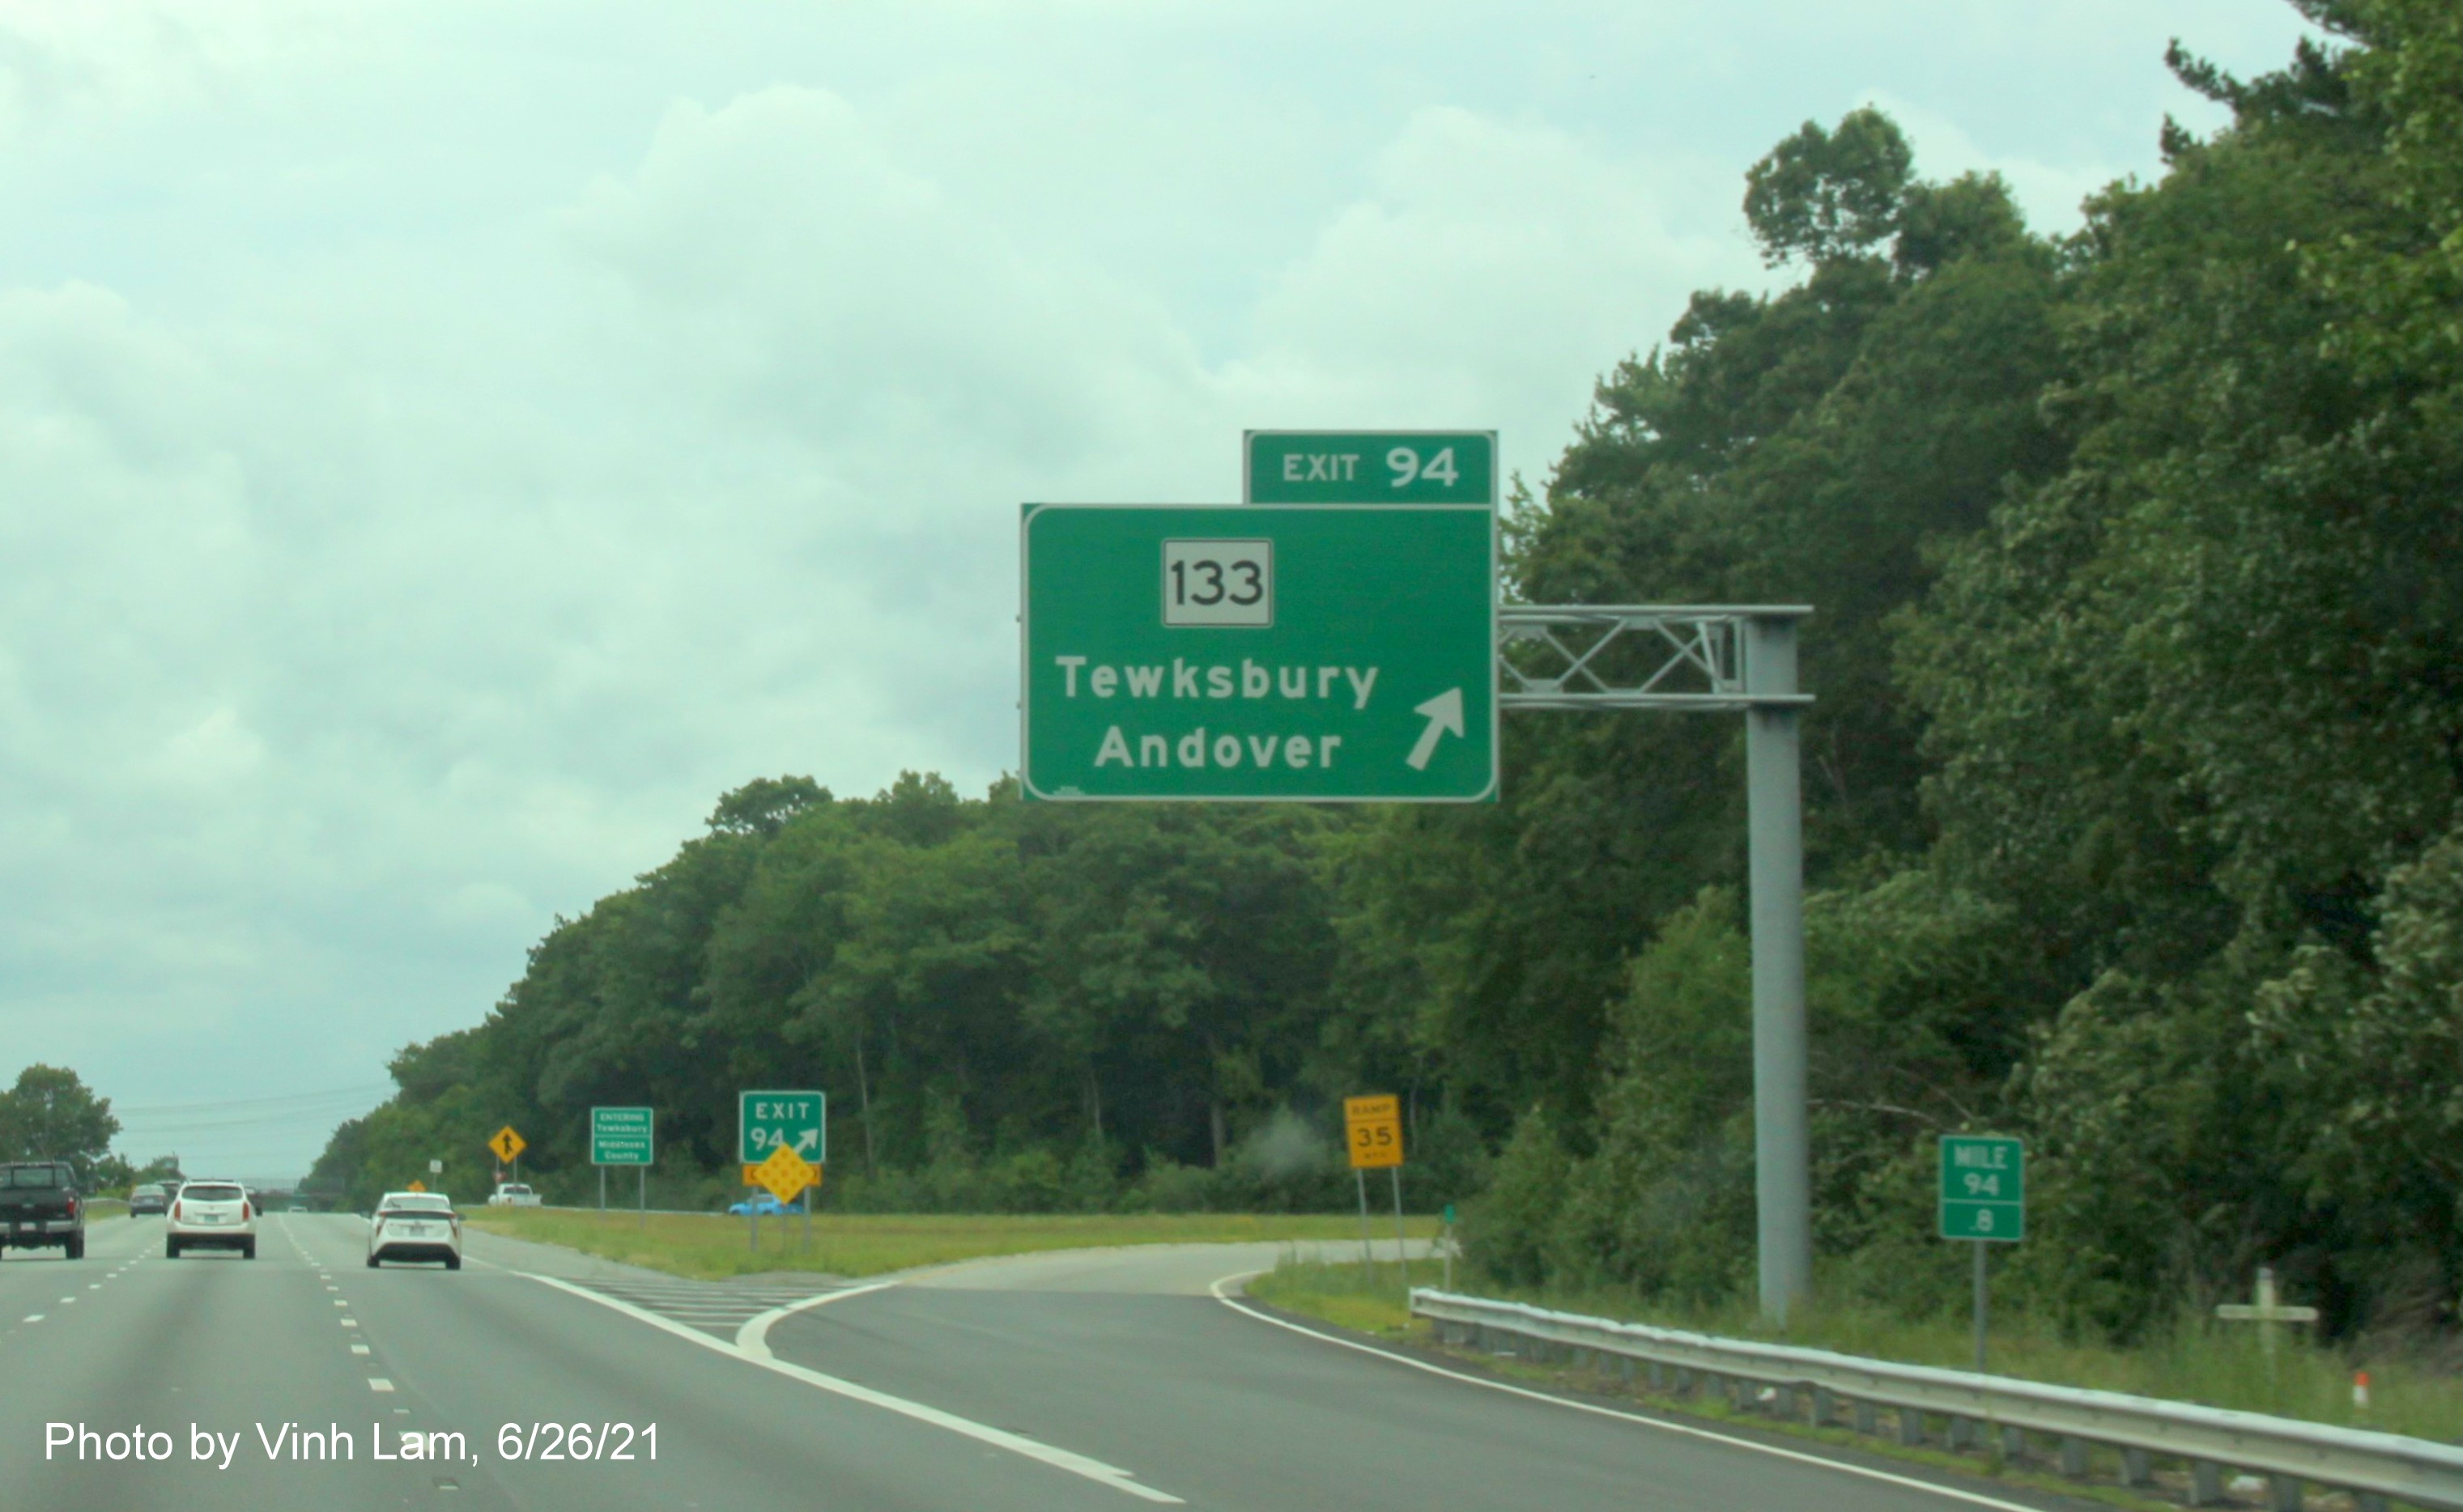 Image of overhead ramp sign for MA 133 exit with new milepost based exit number on I-495 South in Andover, by Vinh Lam, June 2021